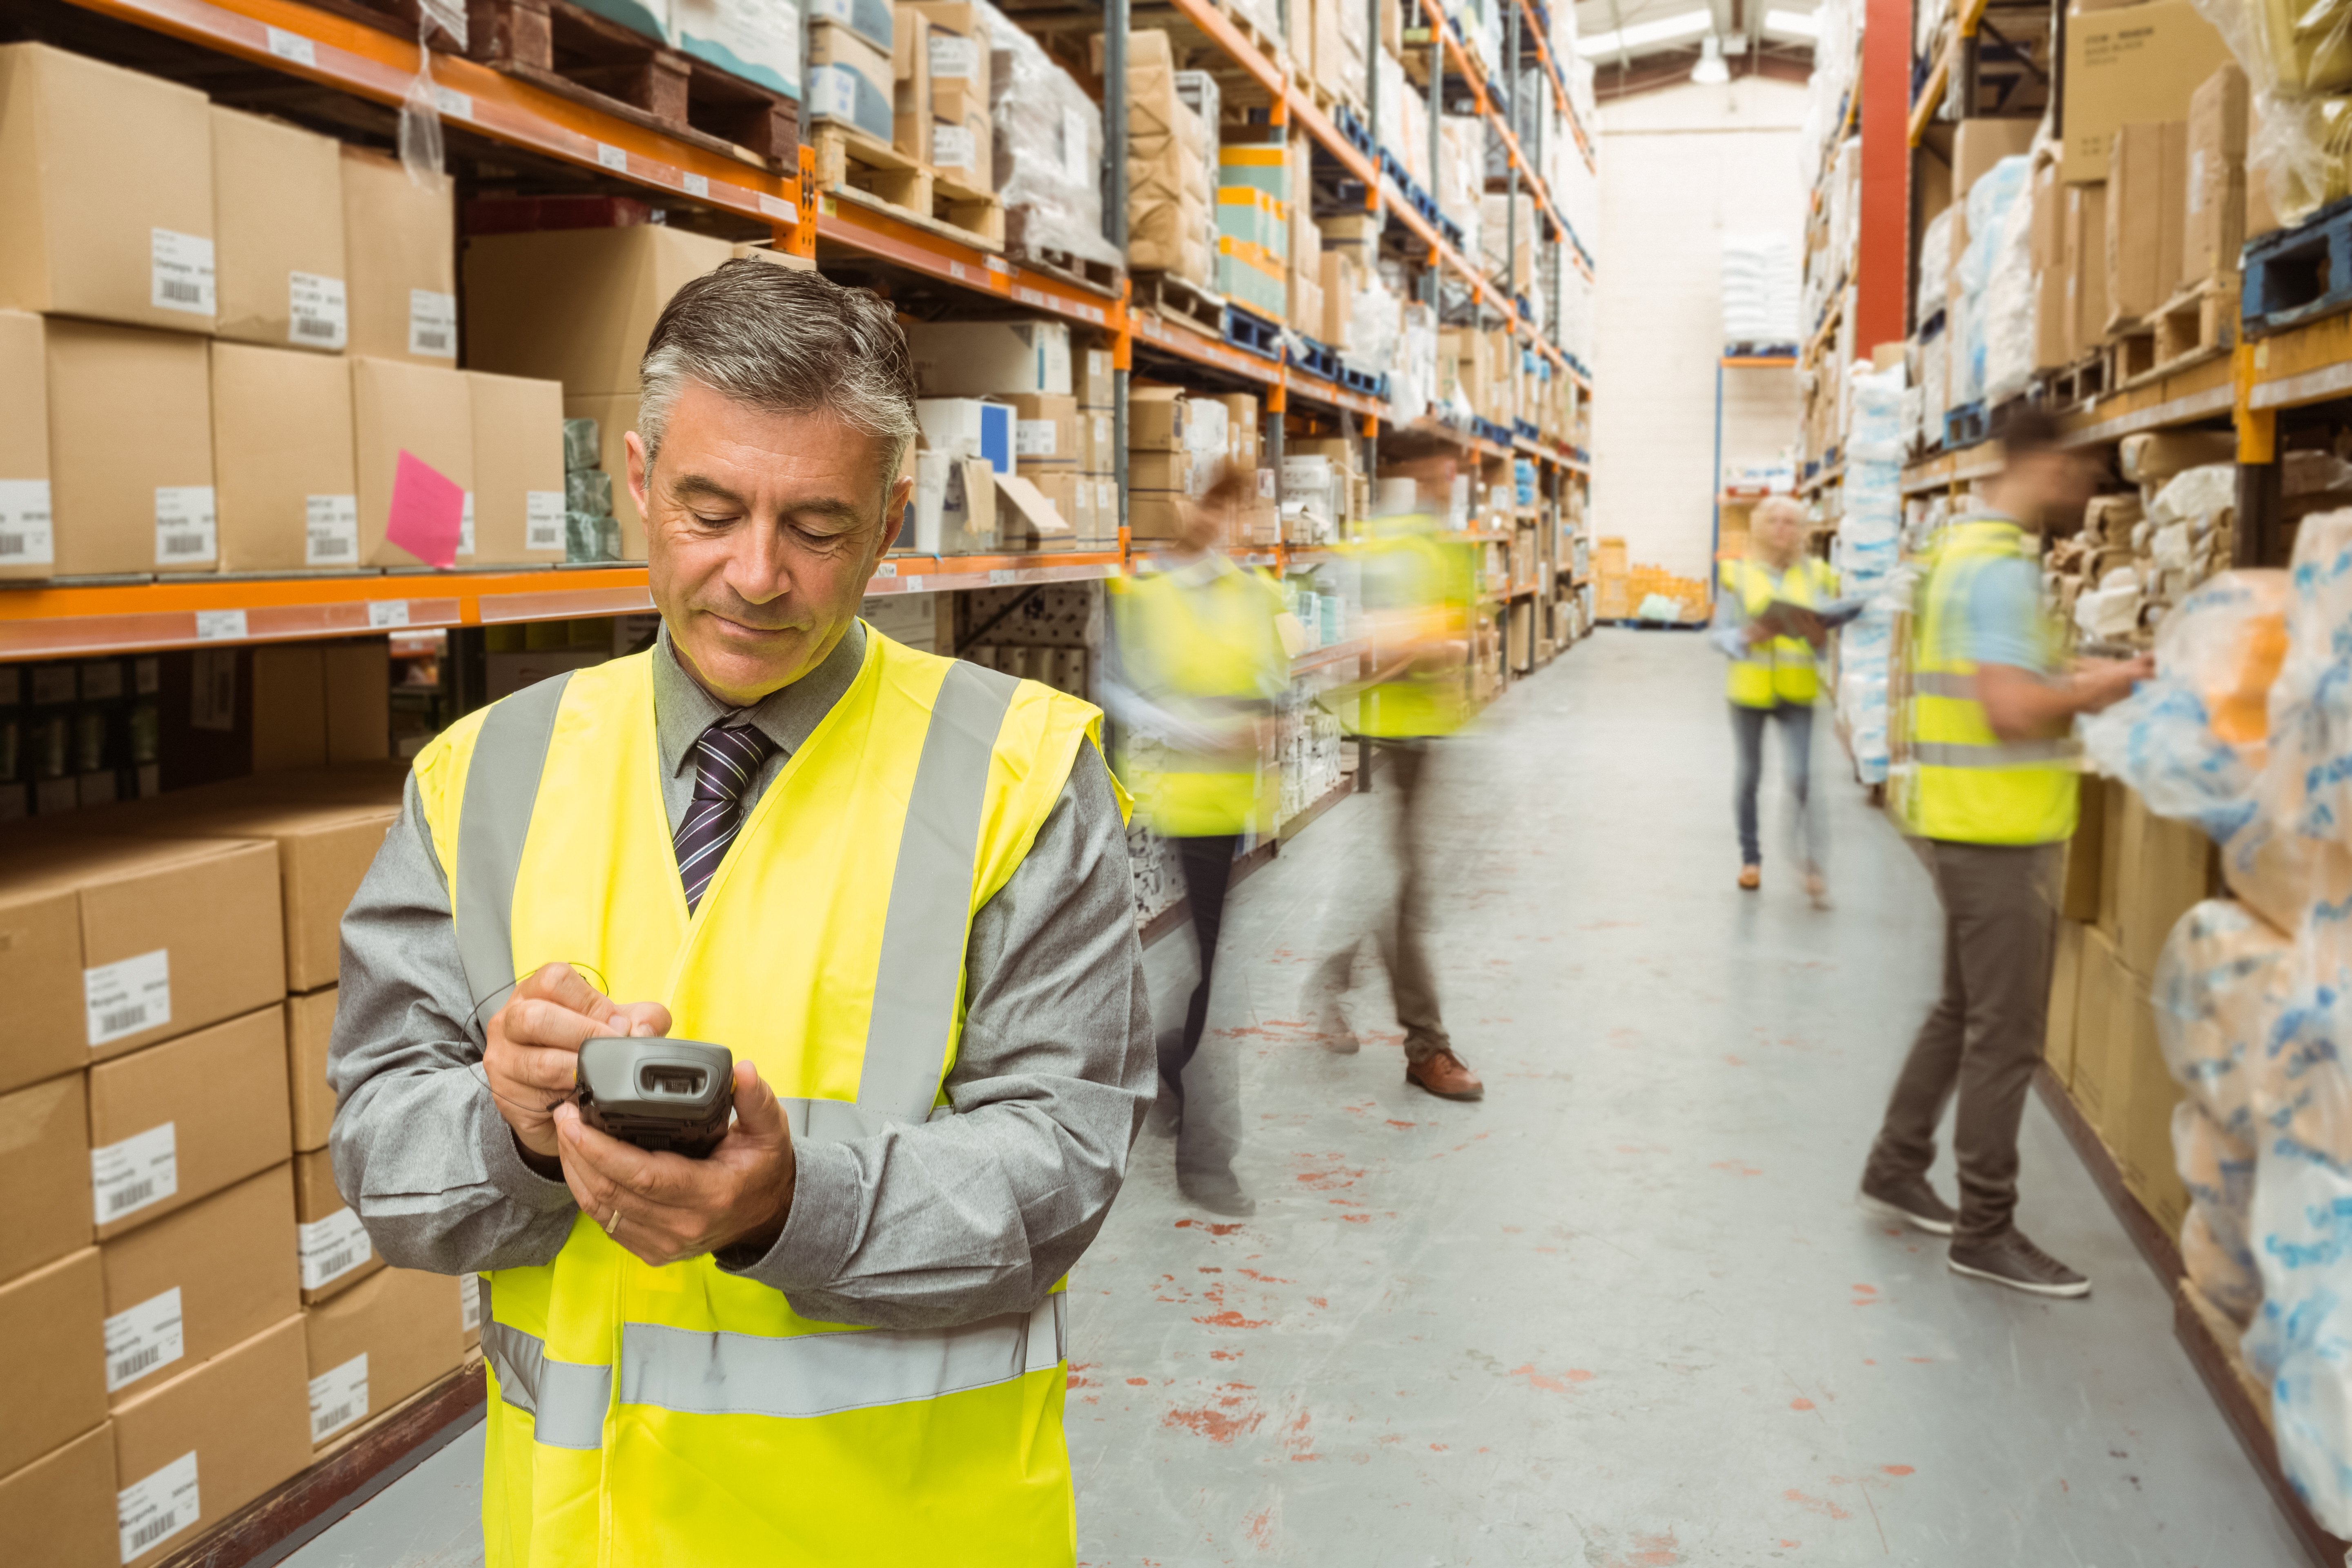 Read: Warehouse Workers are Suffering Musculoskeletal Effects